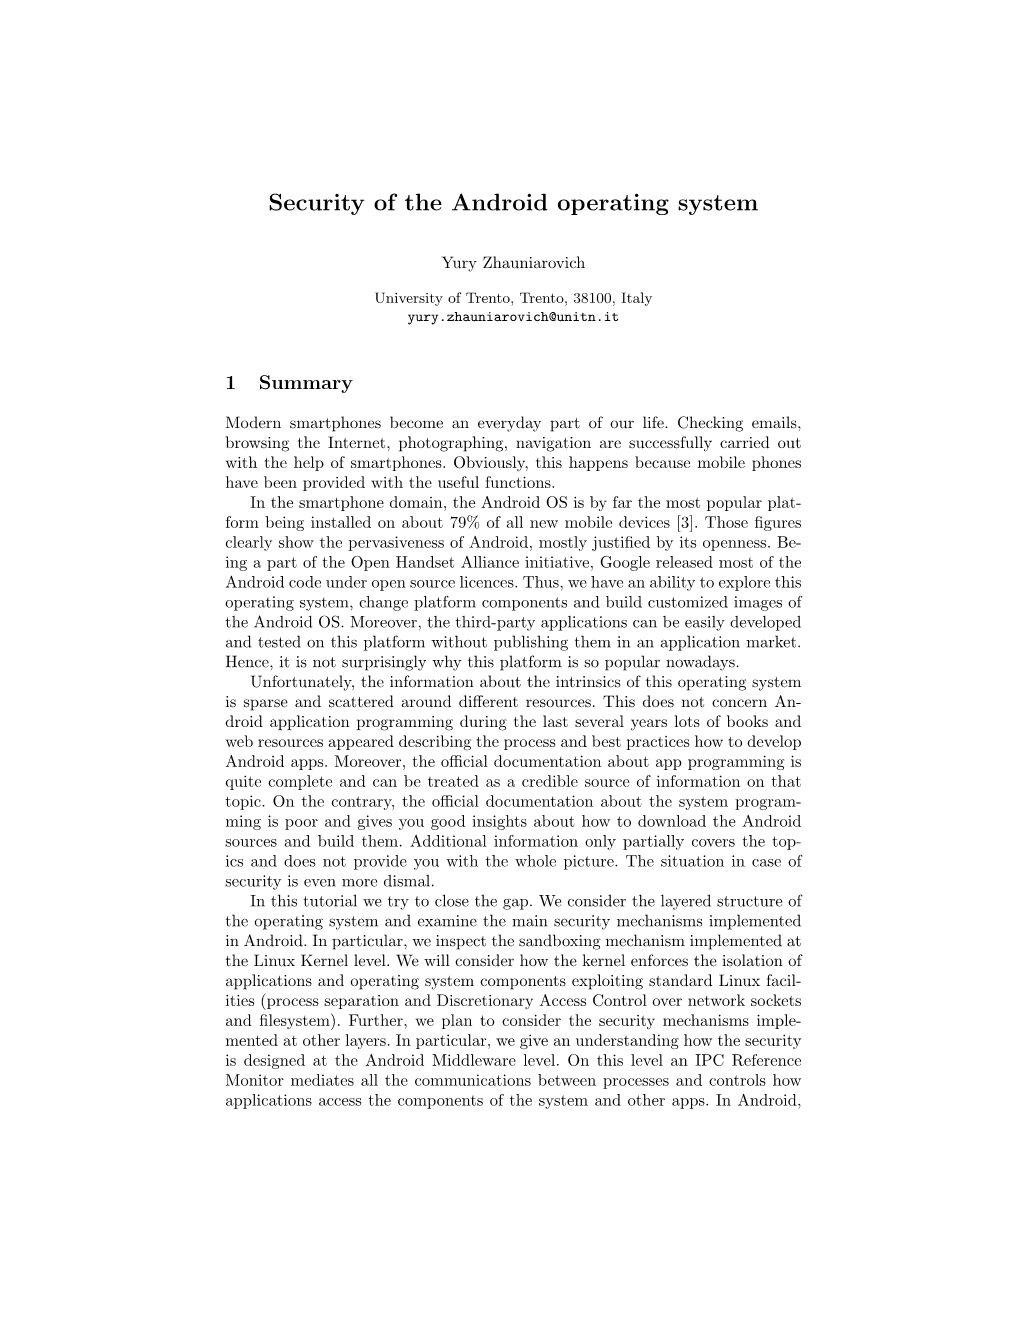 Security of the Android Operating System